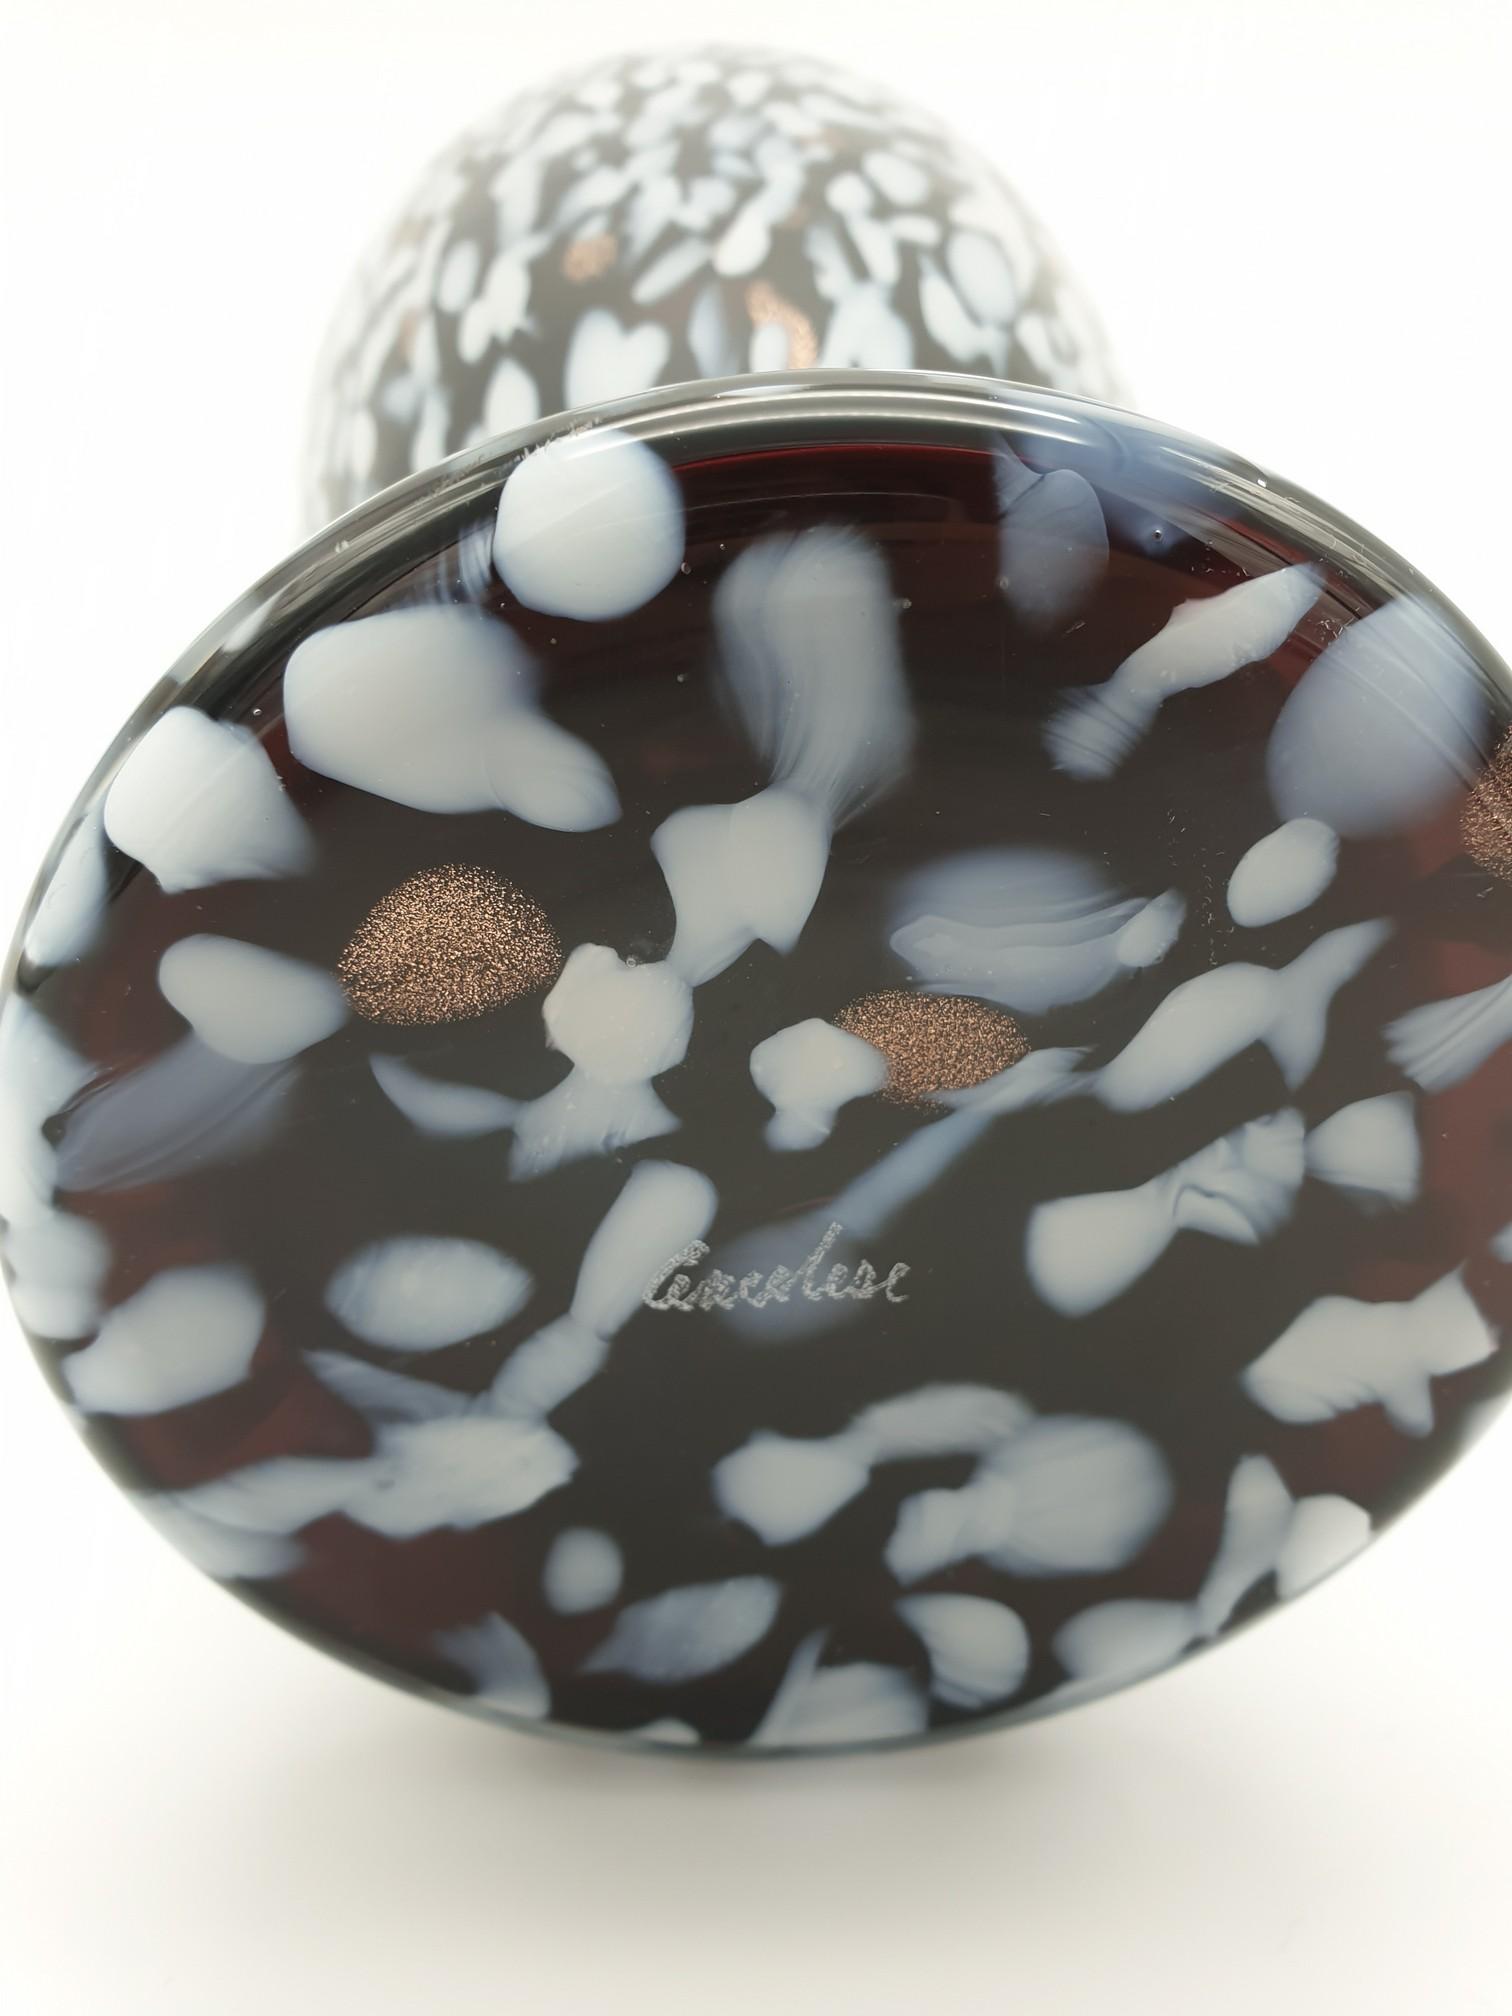 Vintage Murano Glass Vase in Black Color with White Spots by Cenedese, 1970s For Sale 4